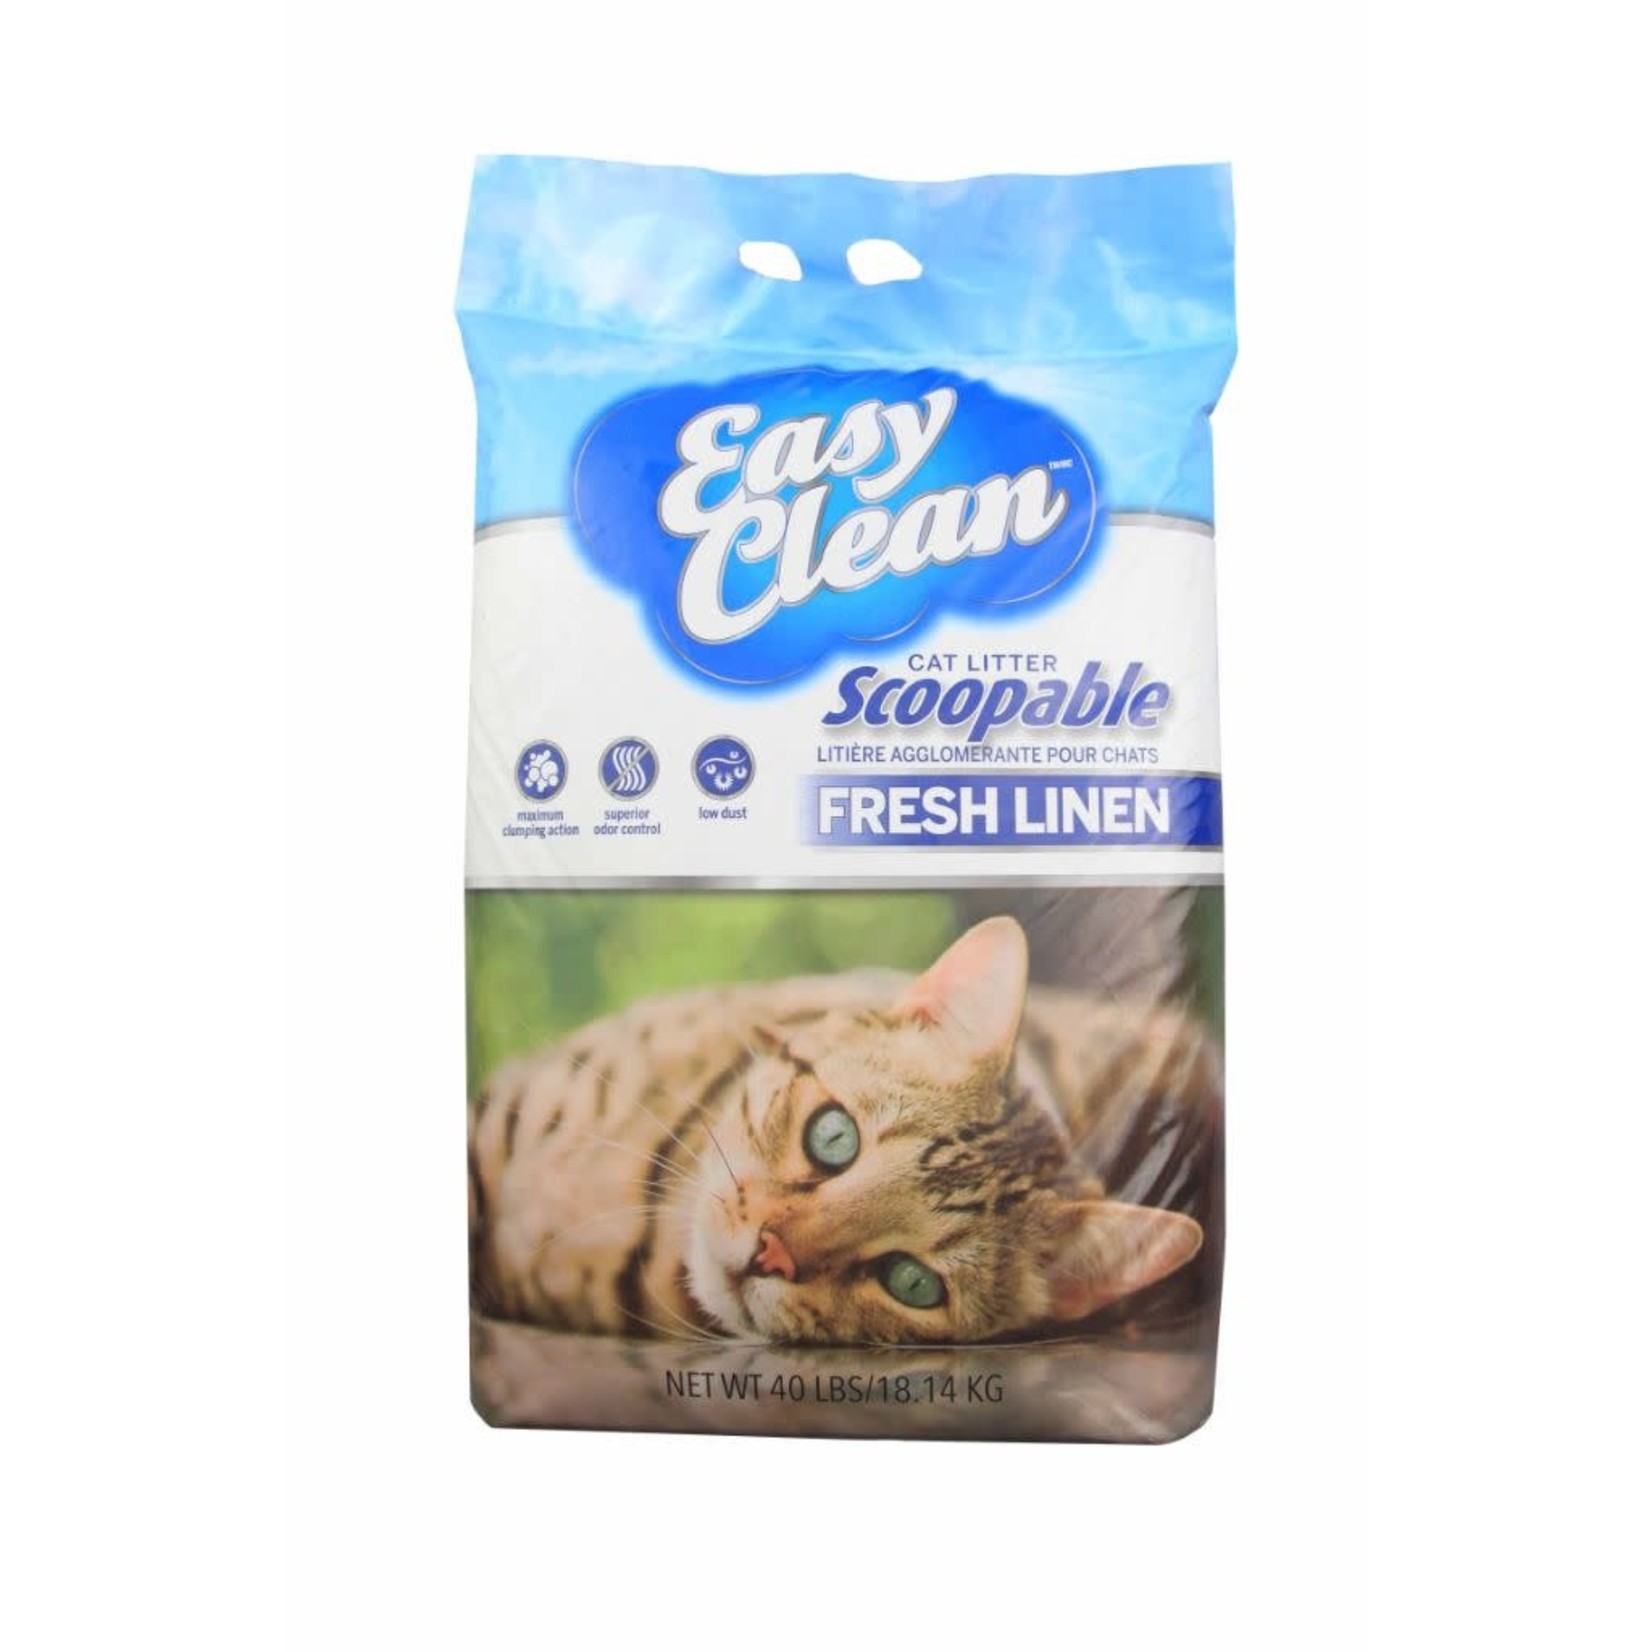 PESTELL PET PRODUCTS Copy of Easy Clean Unscented Clumping Cat Litter 20LB